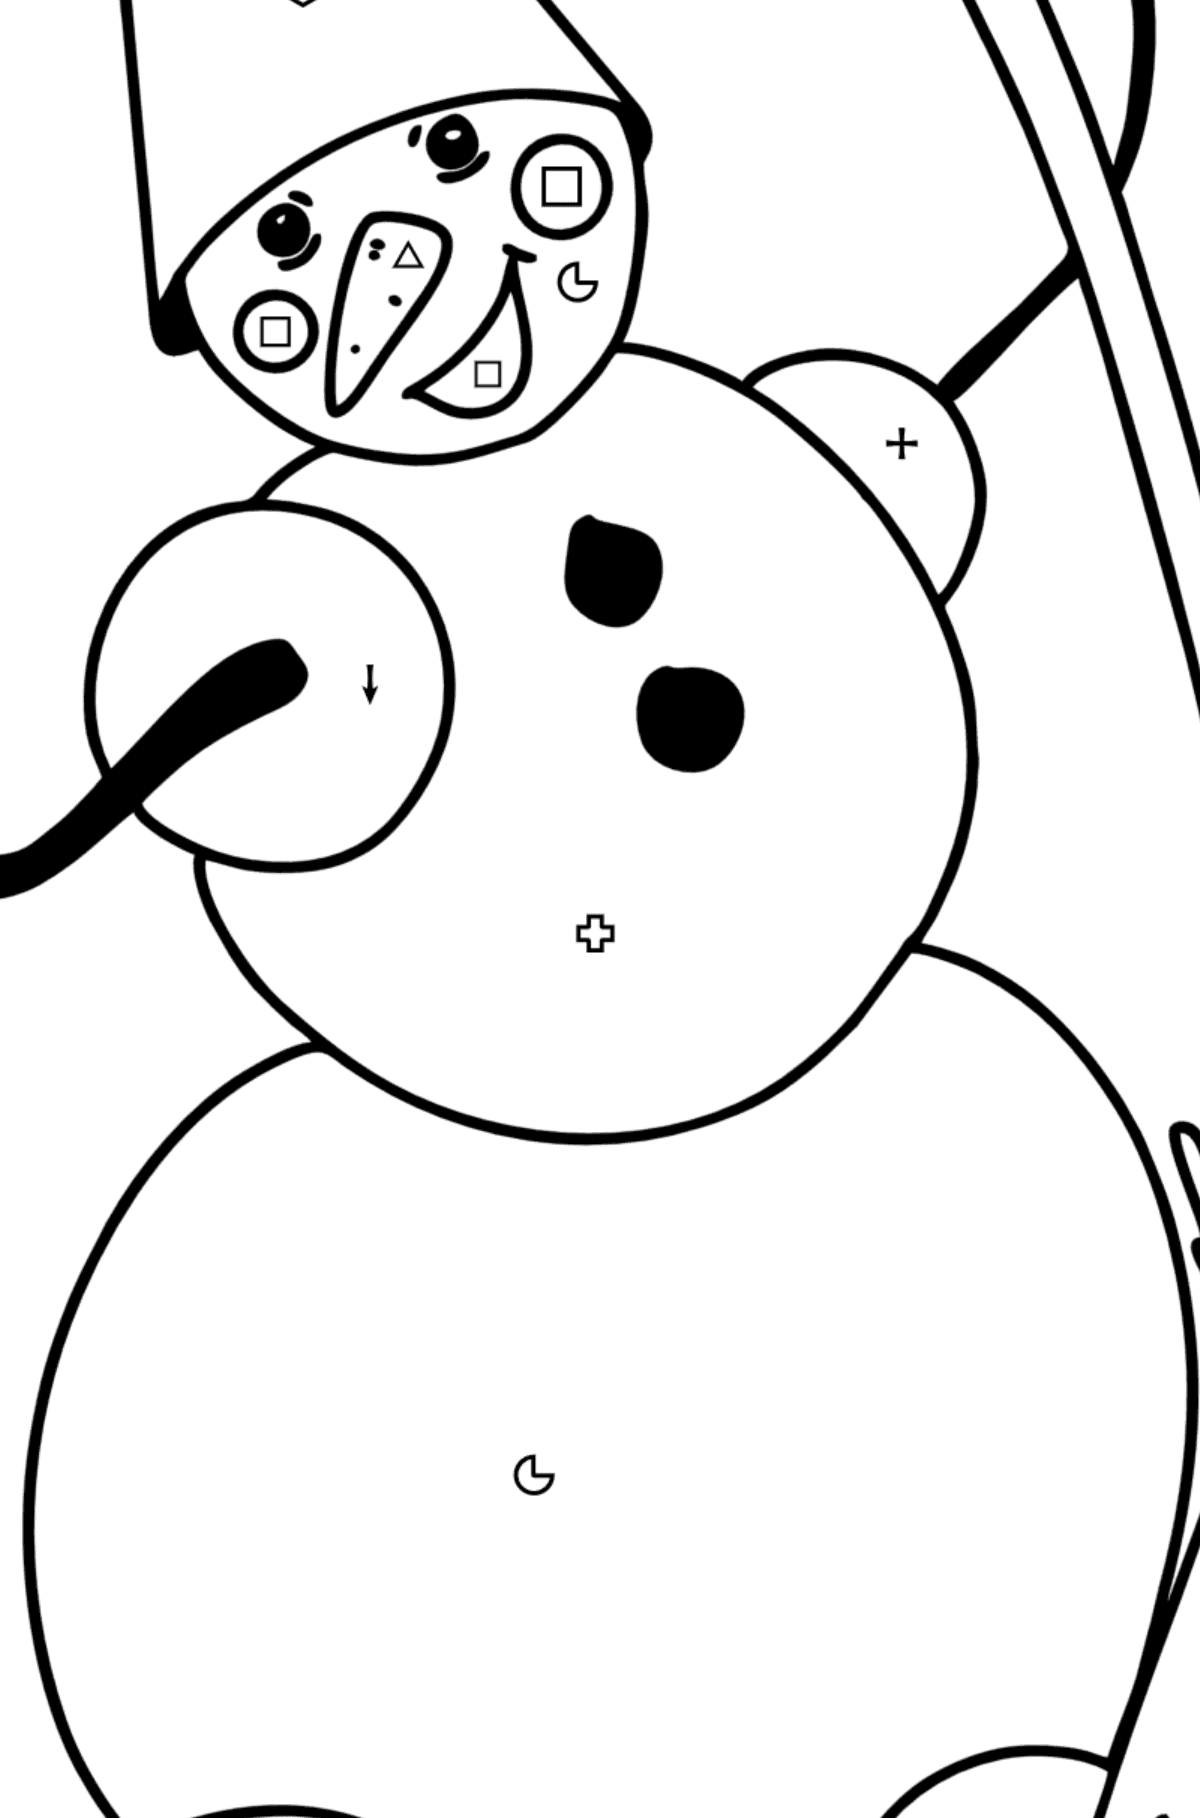 Snowman with Broom coloring page - Coloring by Symbols and Geometric Shapes for Kids